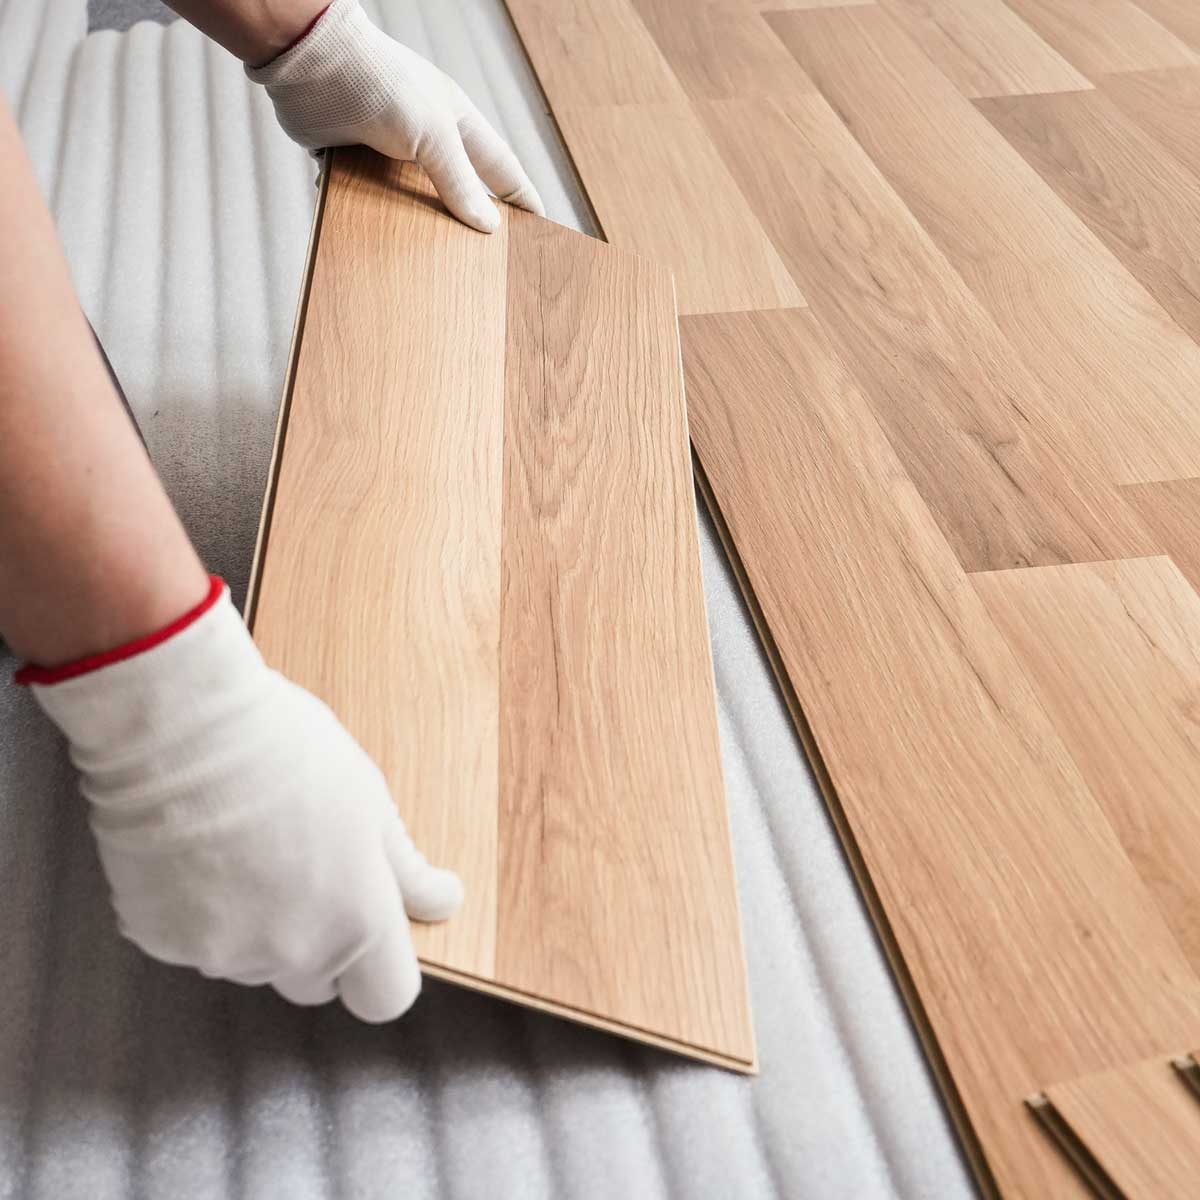 8 for Laminate Flooring Installations | The